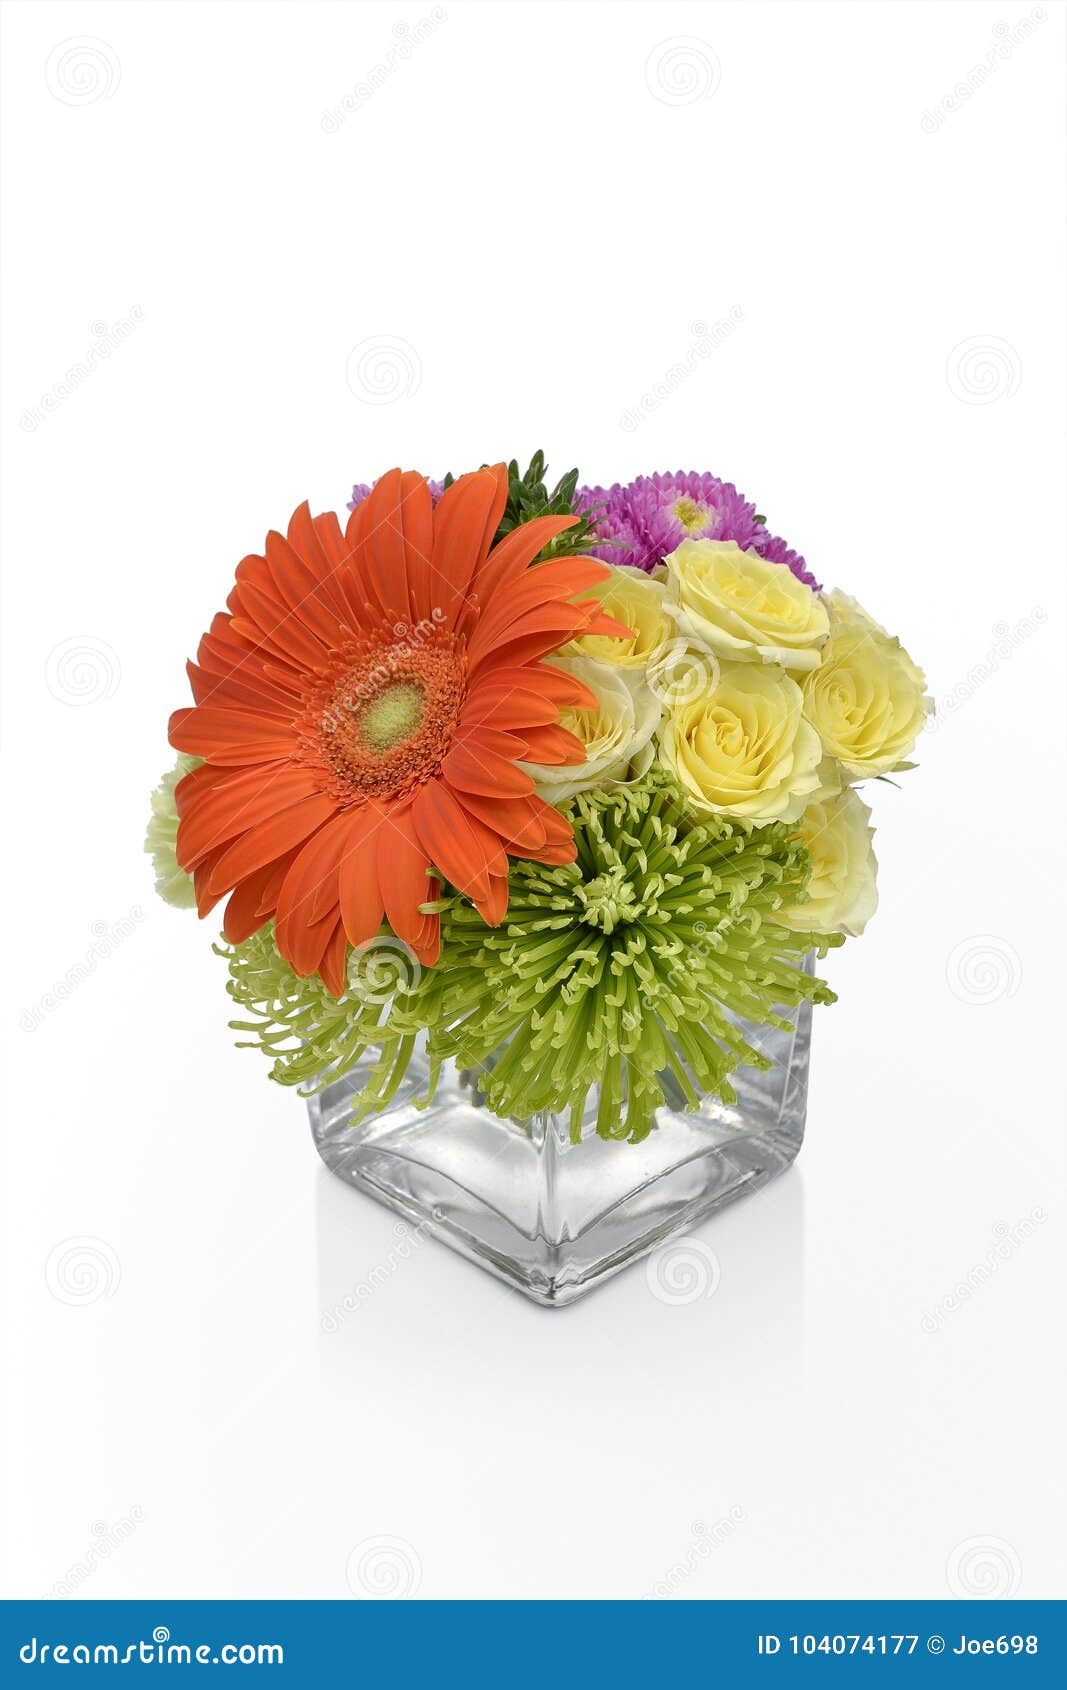 Gerbera Daisy Flower Arrangement In A Vase With Yellow Roses Floral Vase Arrangement By A Florist Stock Image Image Of Blossom Floristry 104074177